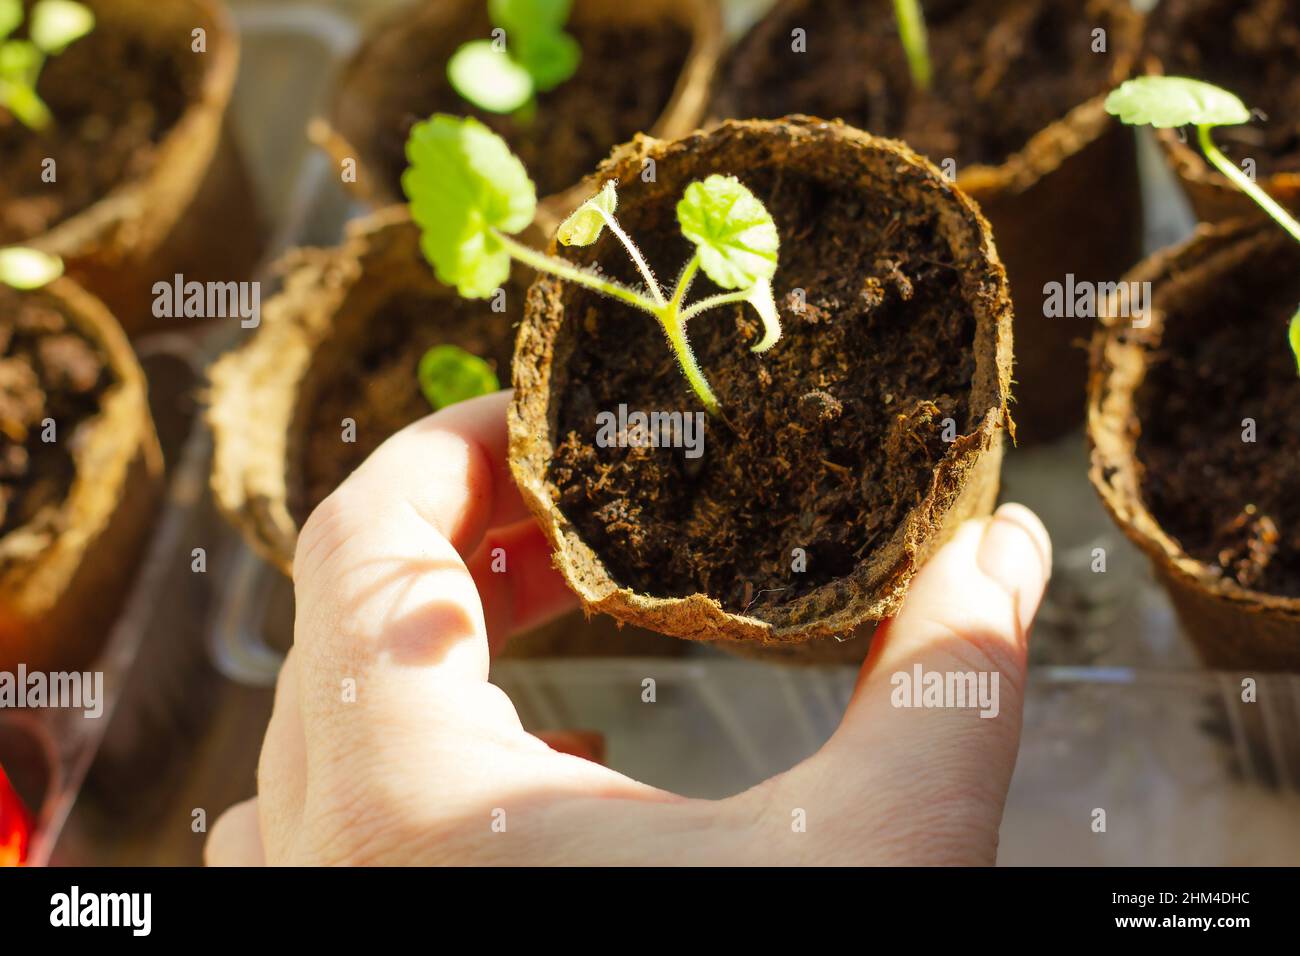 The process of transplanting seedlings of geranium flowers into peat pots.  Stock Photo